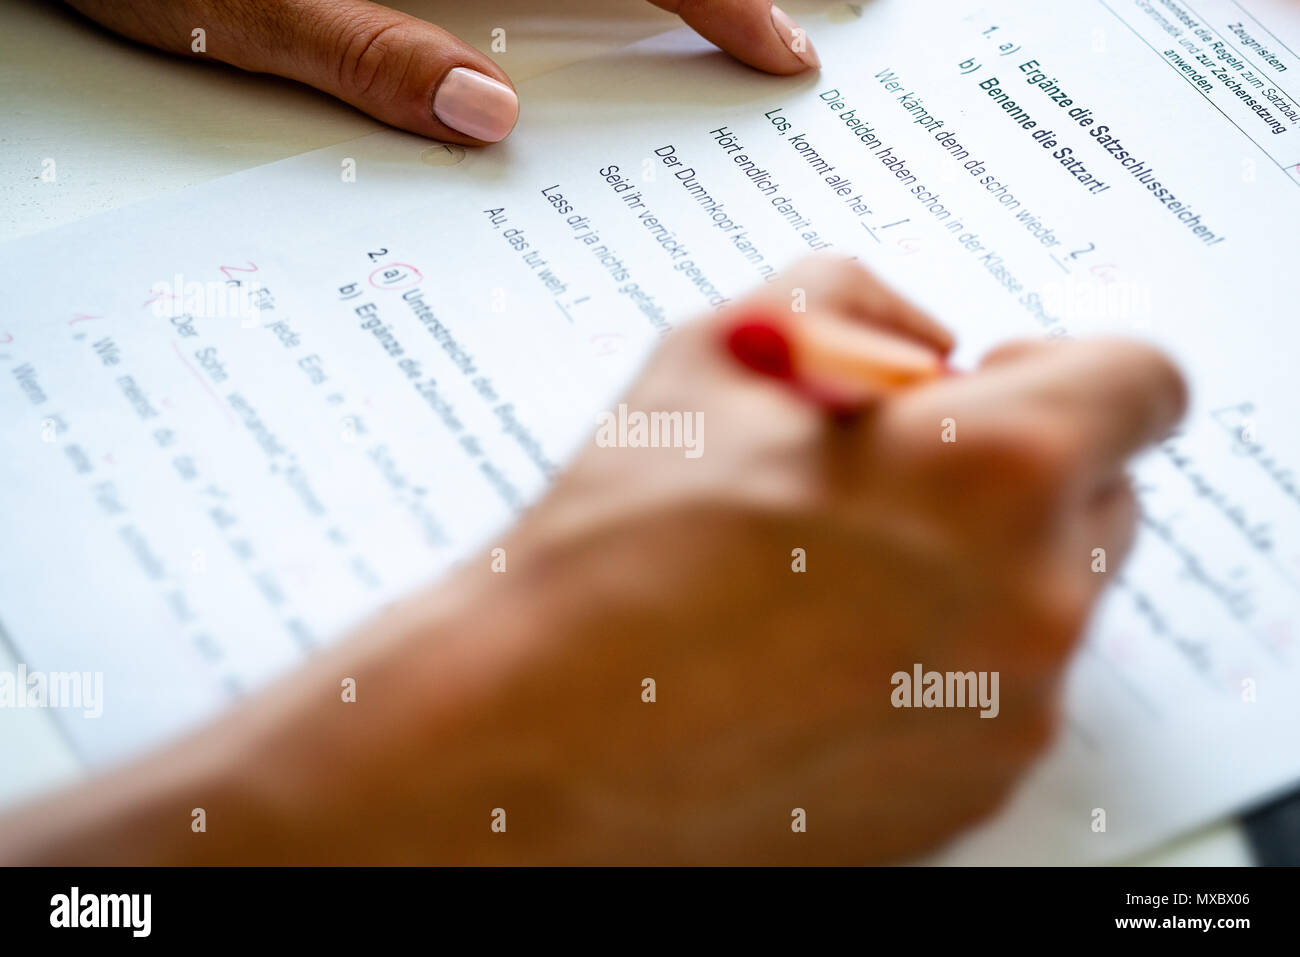 A woman is correcting a test in german language. Stock Photo